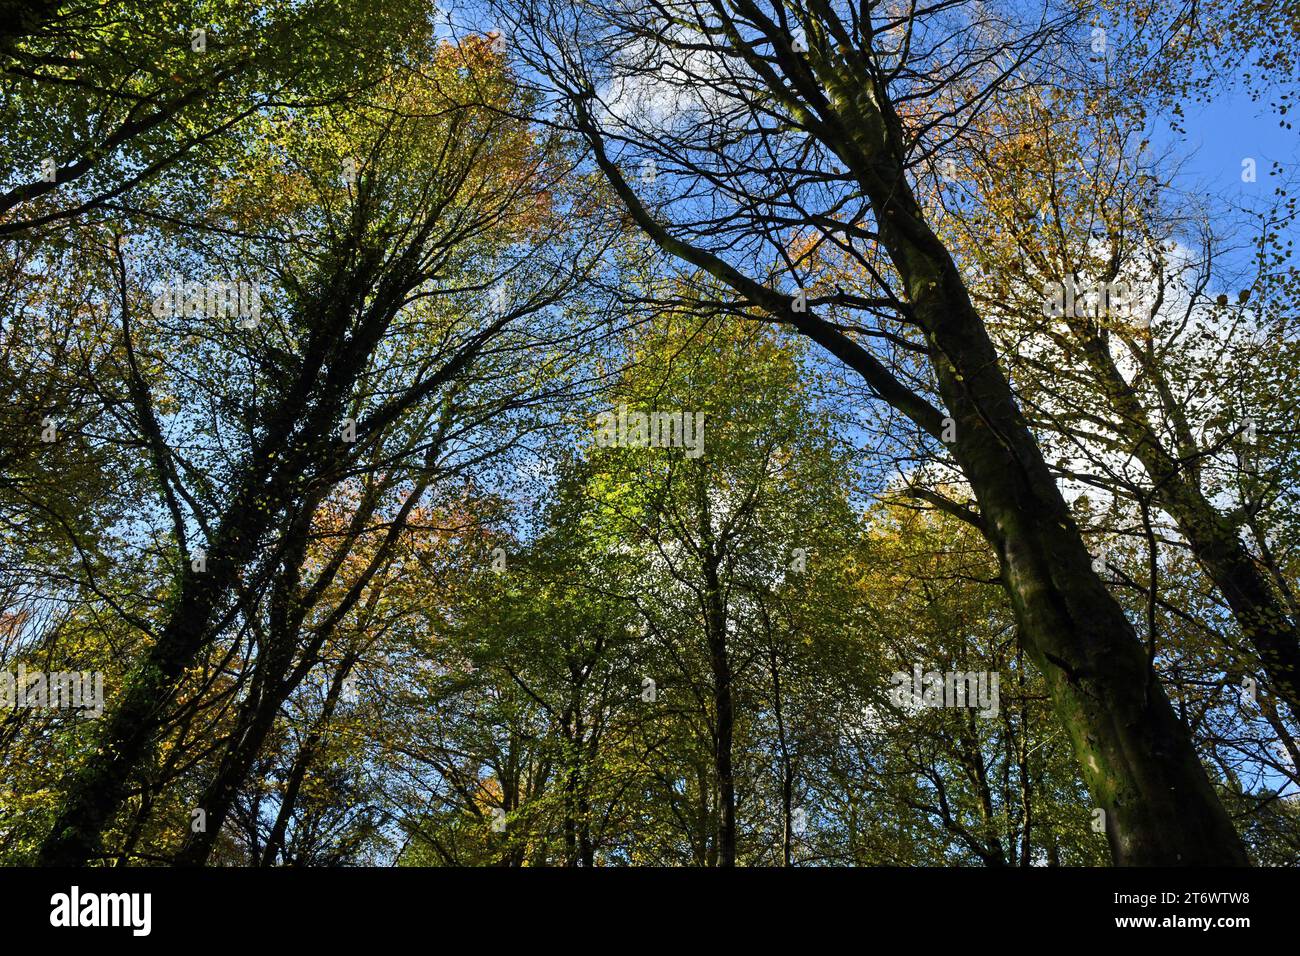 Looking upwards at Fforest Fawr Woodland with a blue sky, white clouds and tall trees reaching upwards towards that sky in Autumn in November Stock Photo